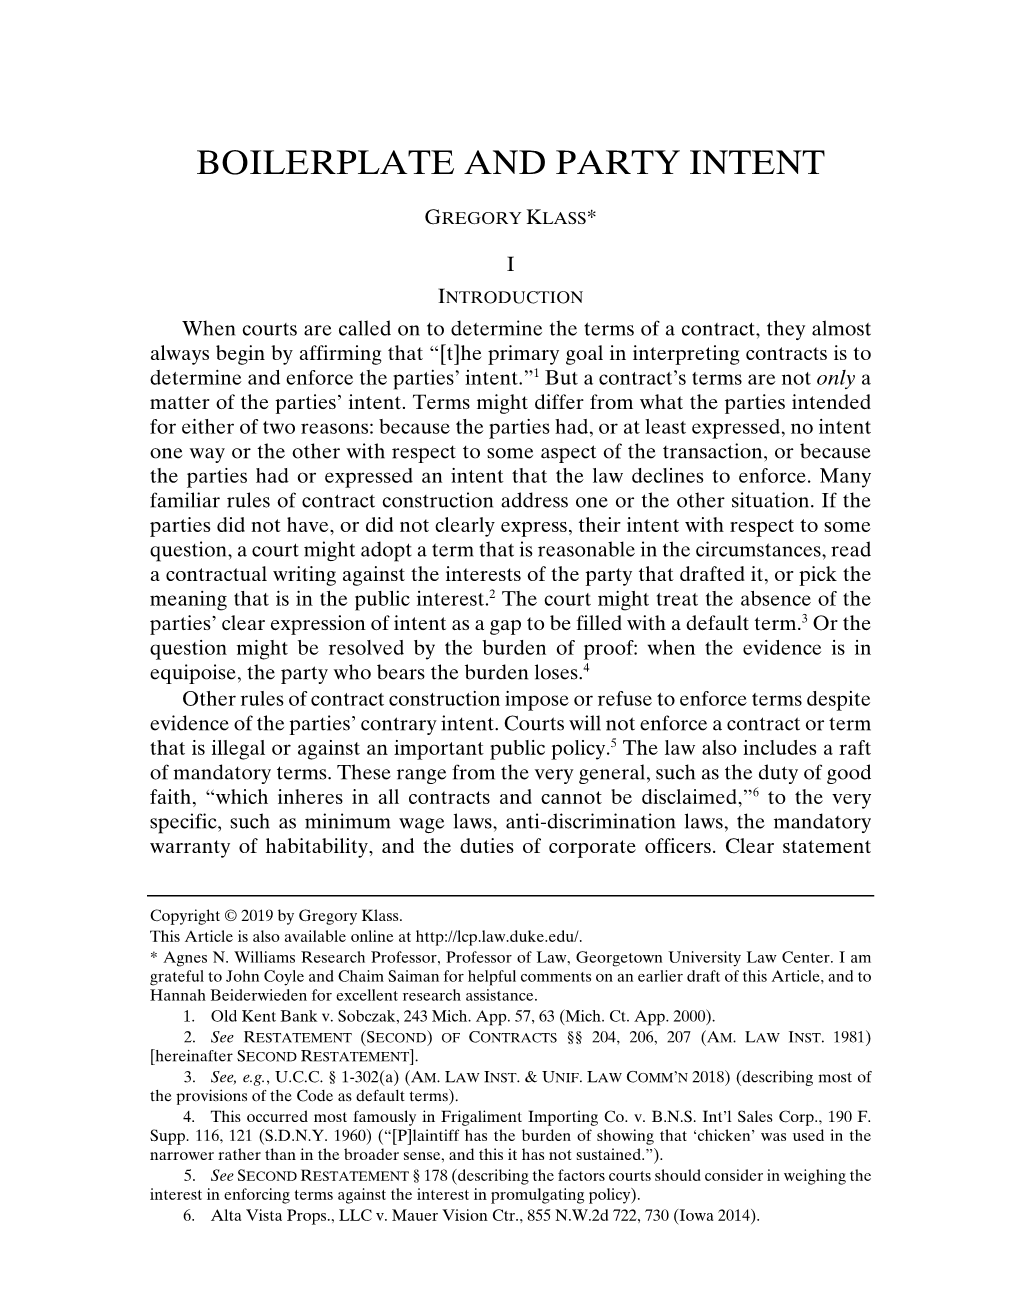 Boilerplate and Party Intent